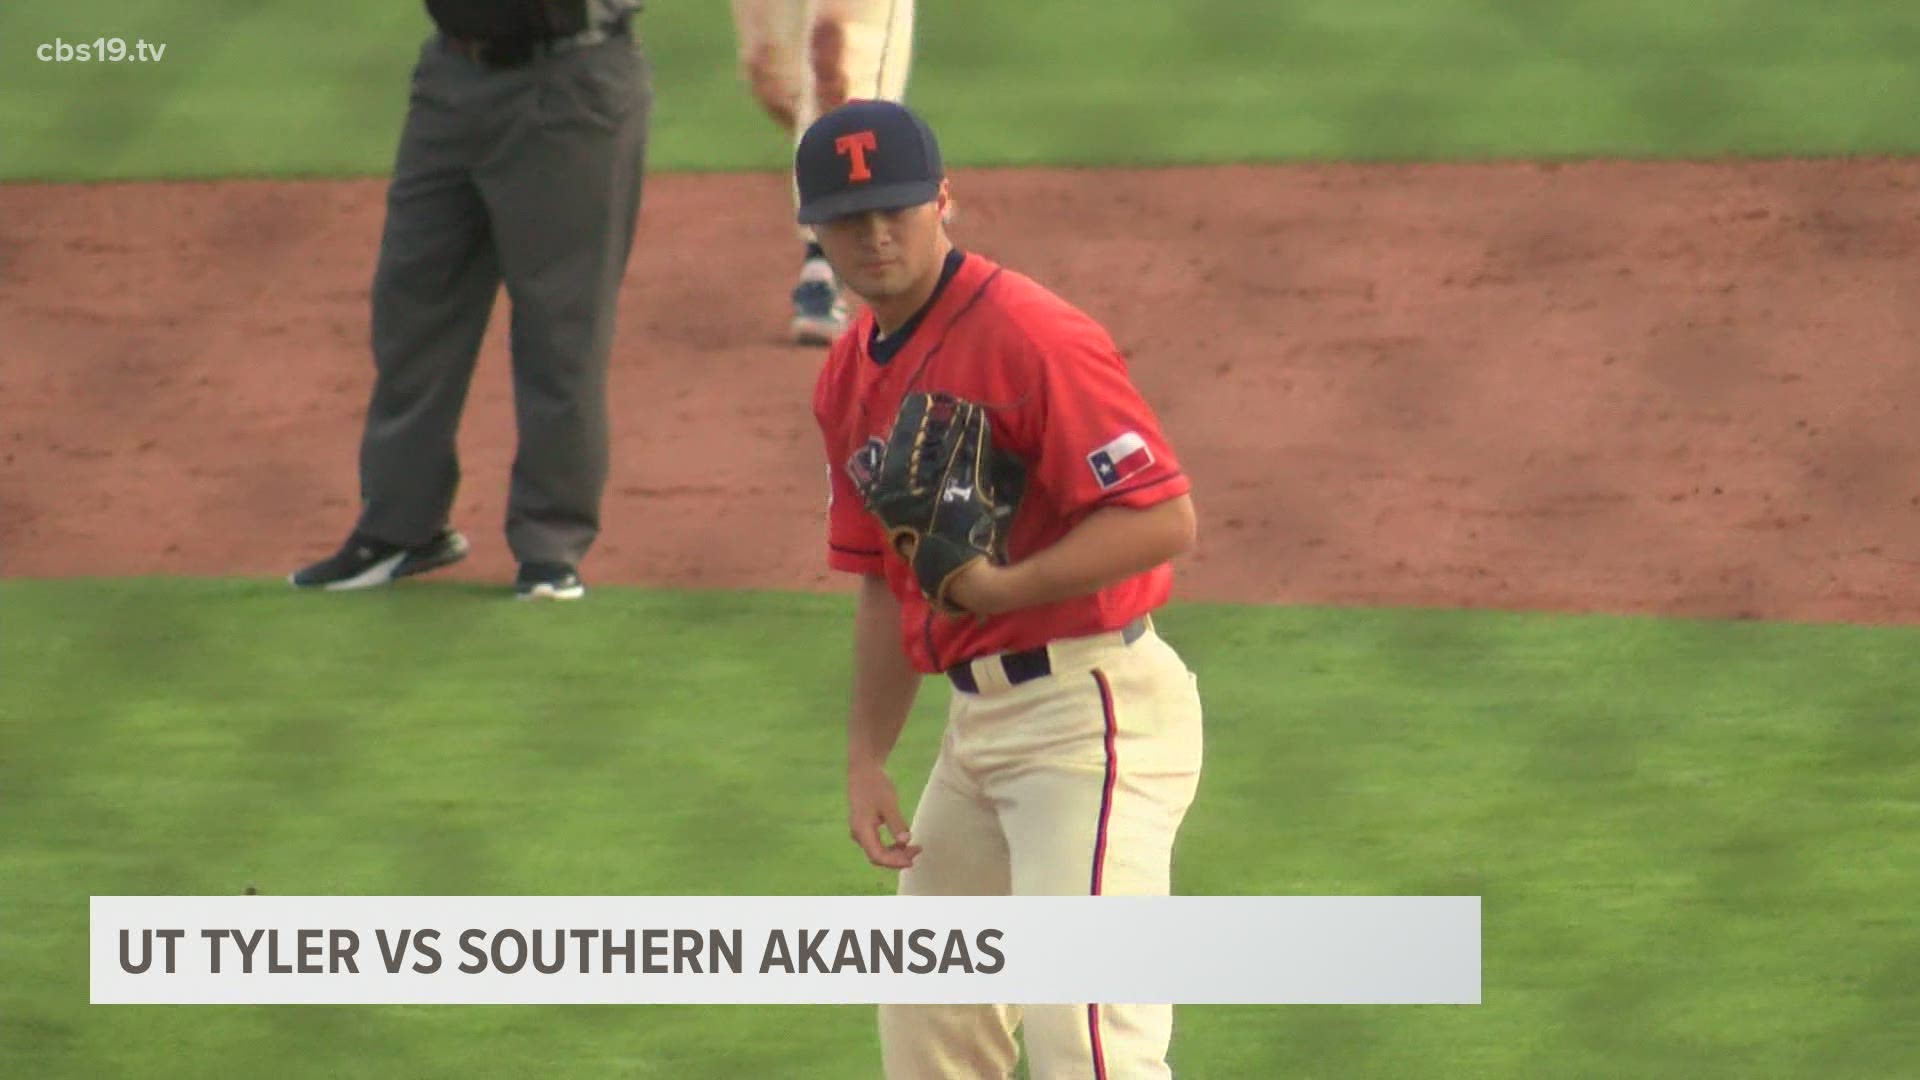 Nightmare 4th inning sinks Pats as they fall to Southern Arkansas 5-4